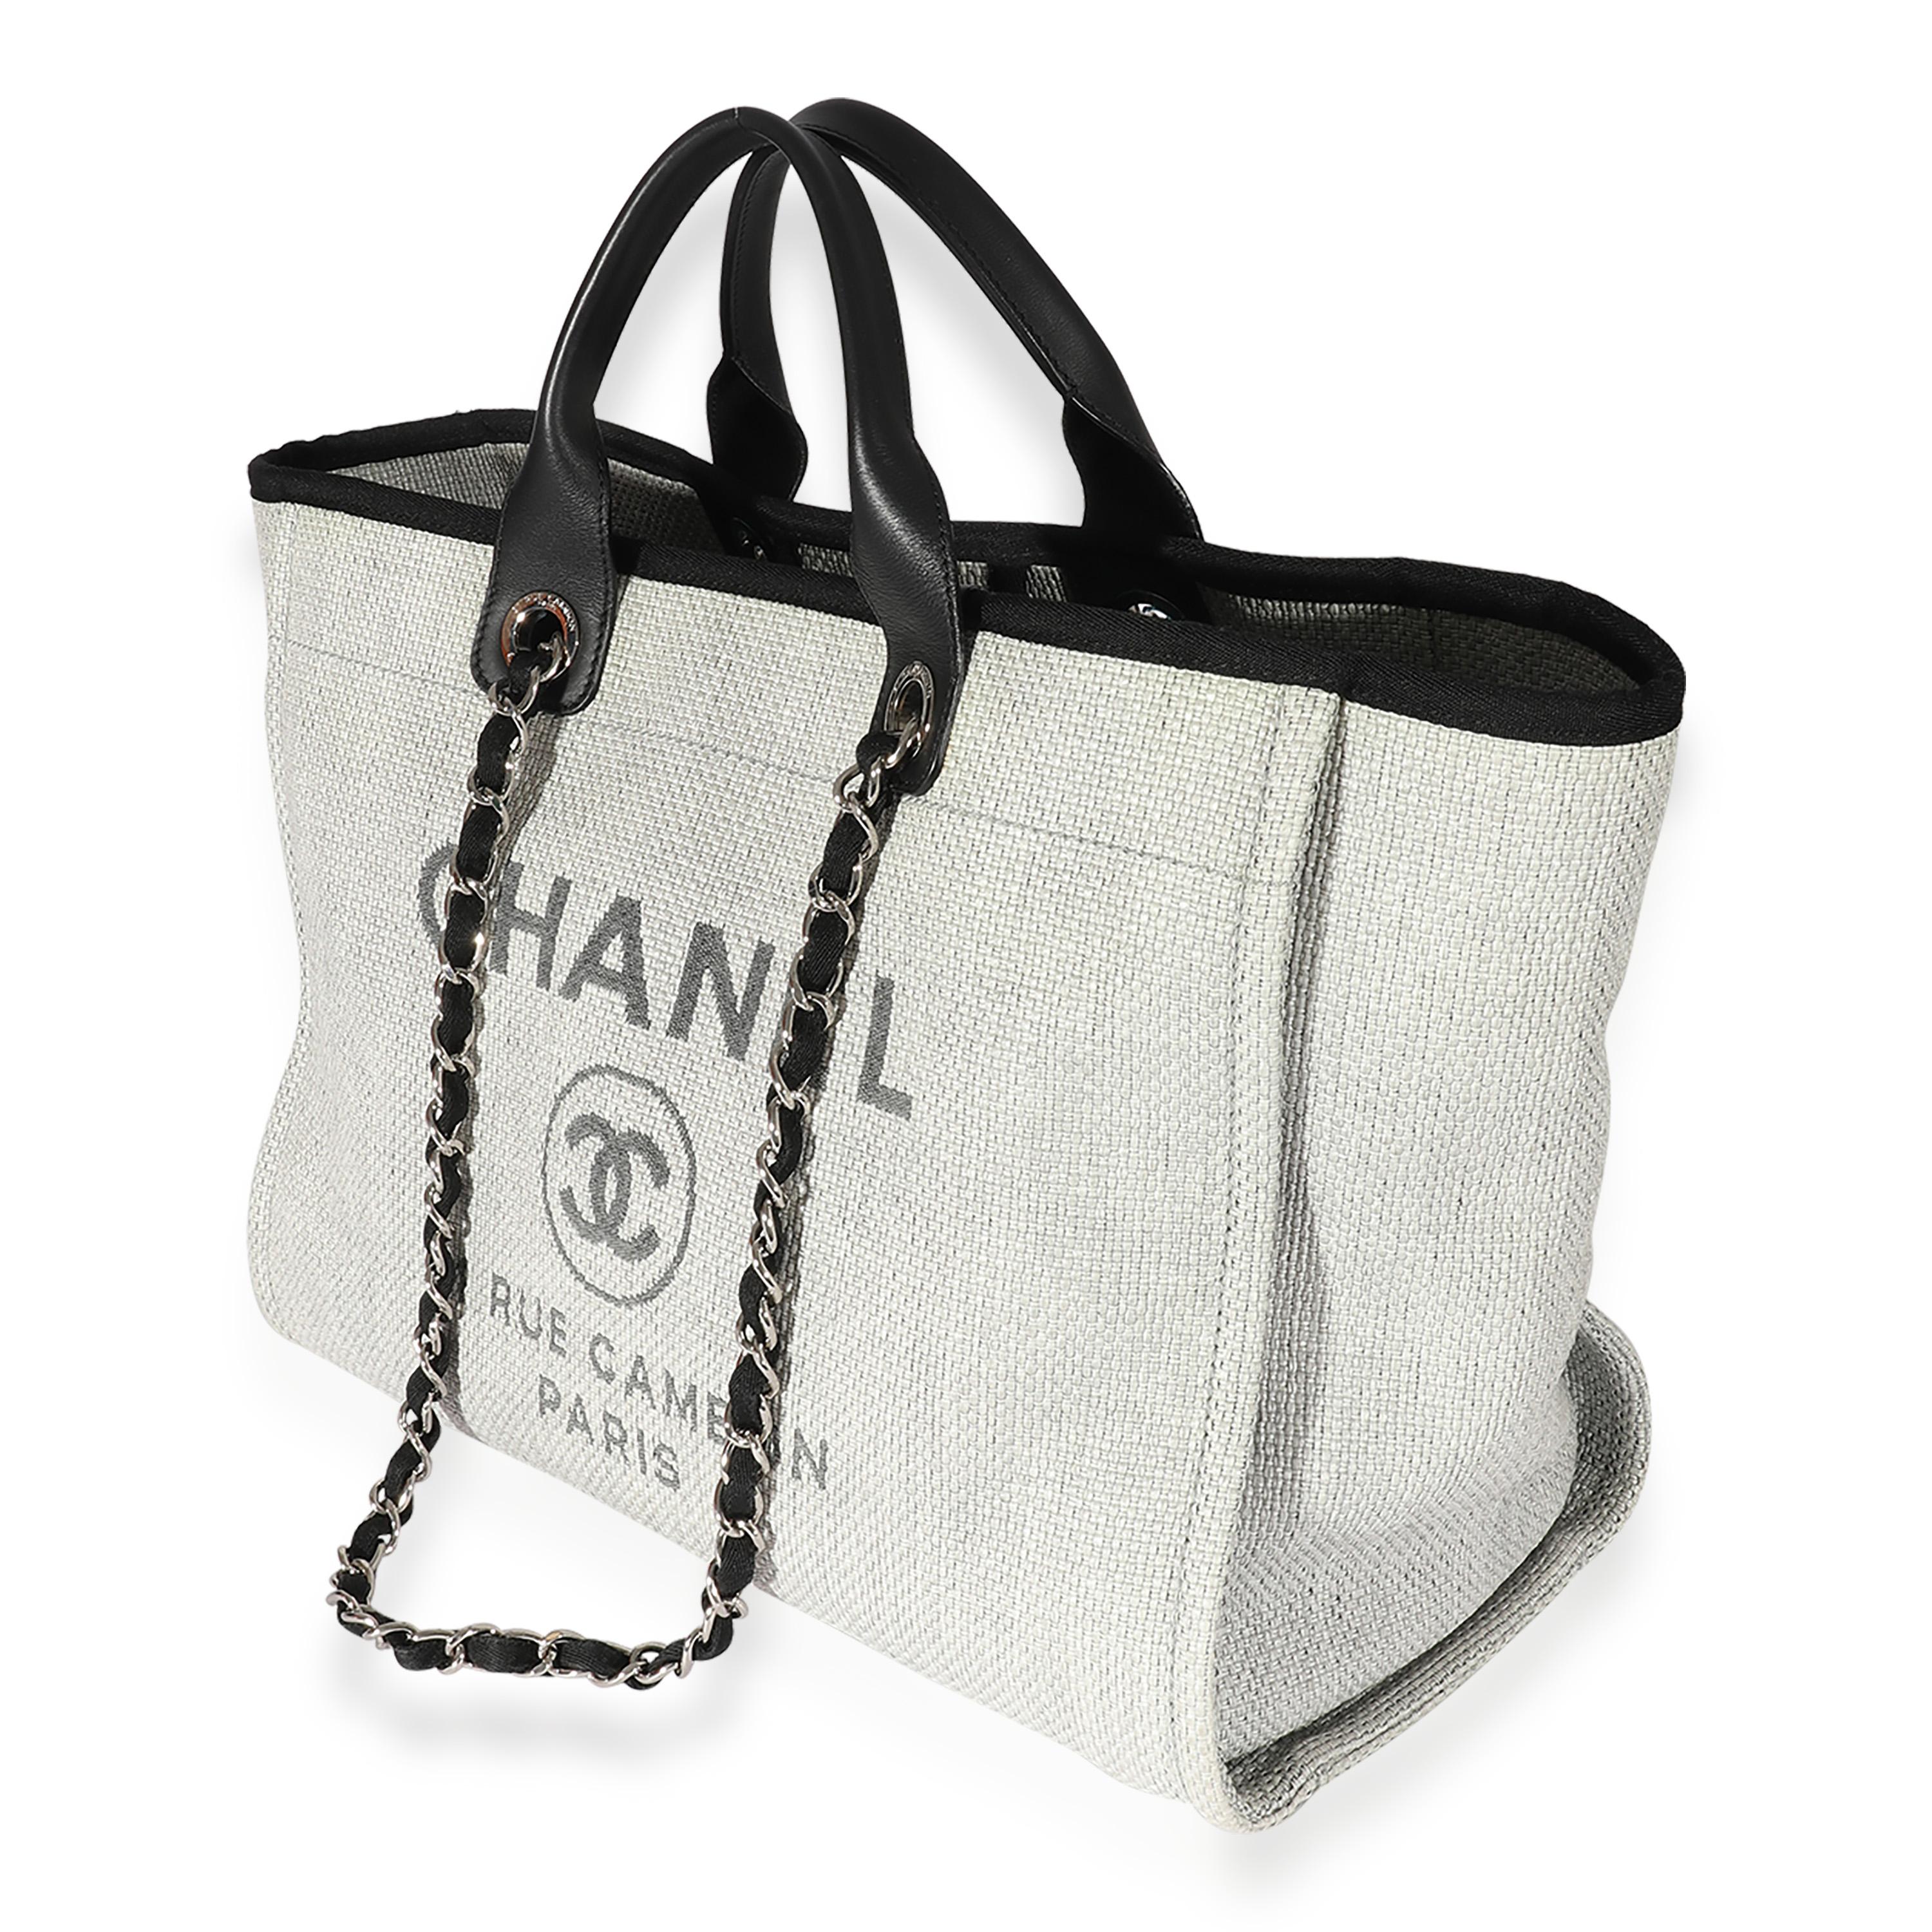 Women's Chanel Grey & Black Canvas Large Deauville Tote